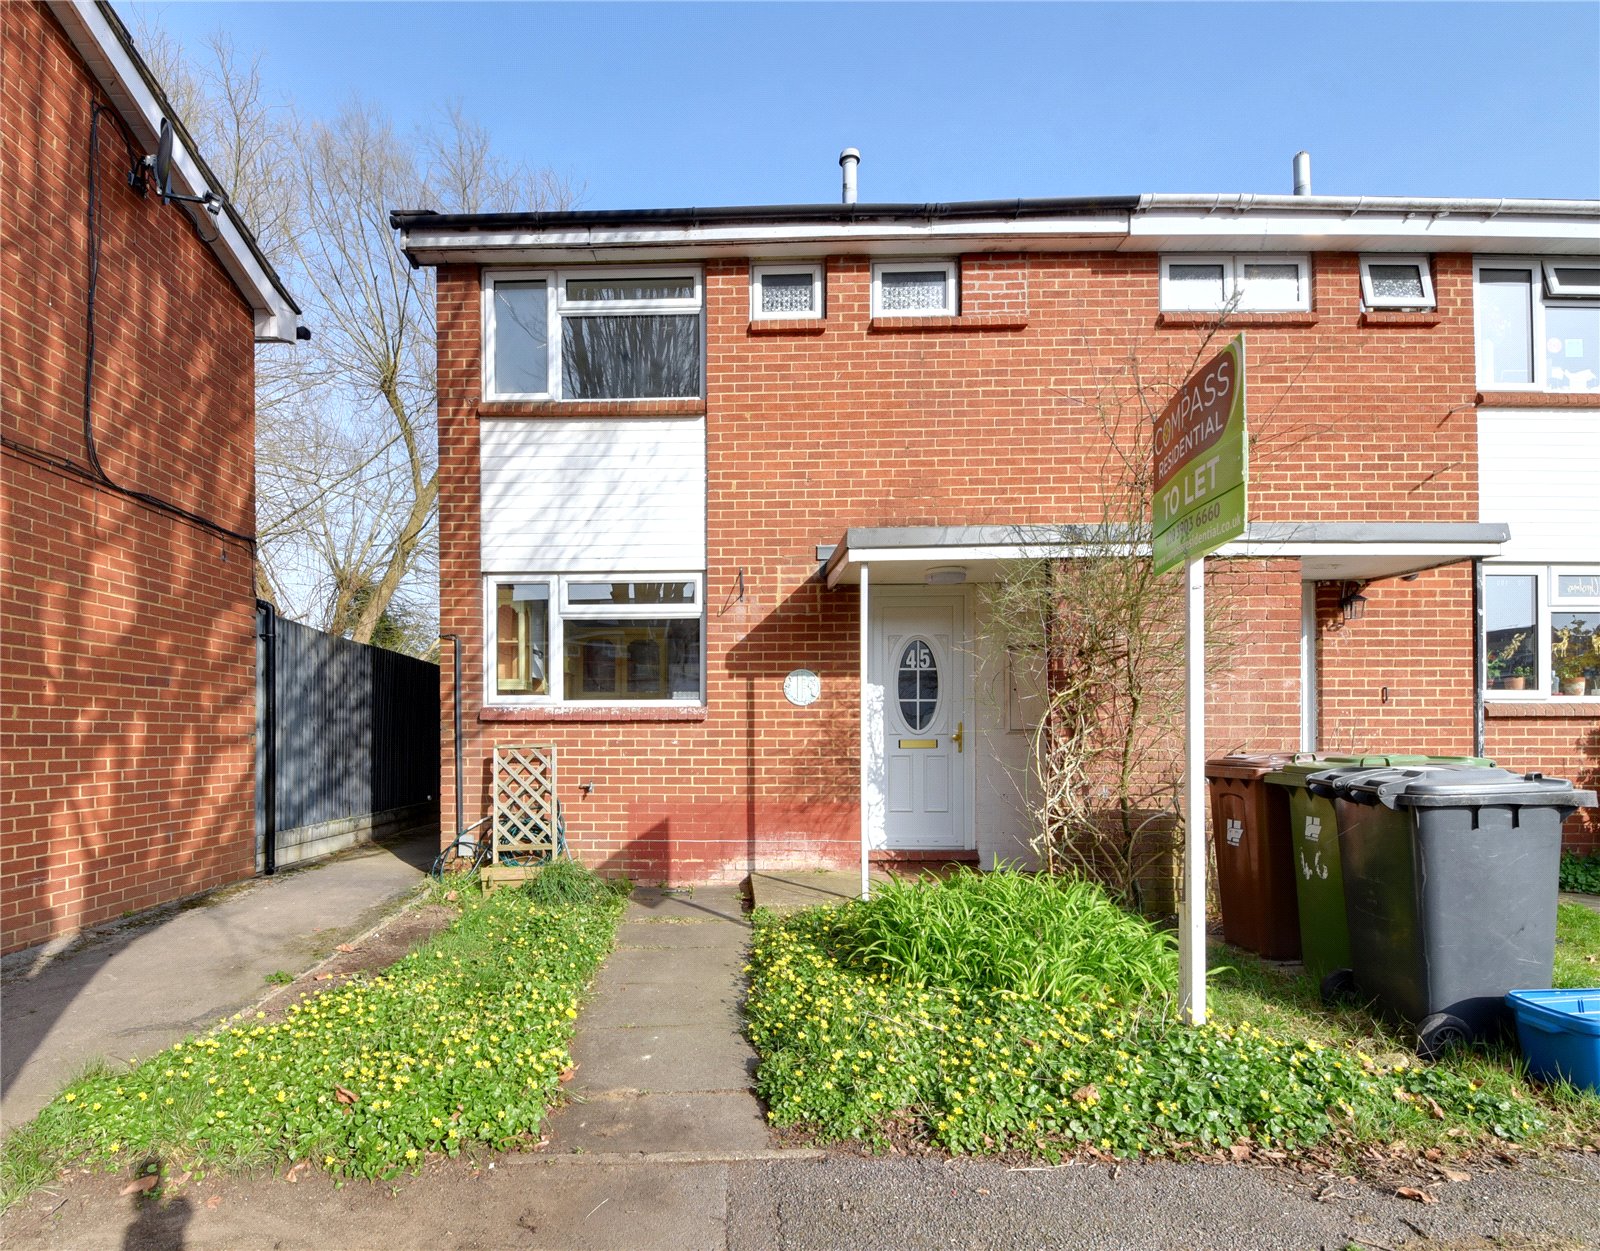 3 bed house to rent in Cooks Mead, Bushey - Property Image 1